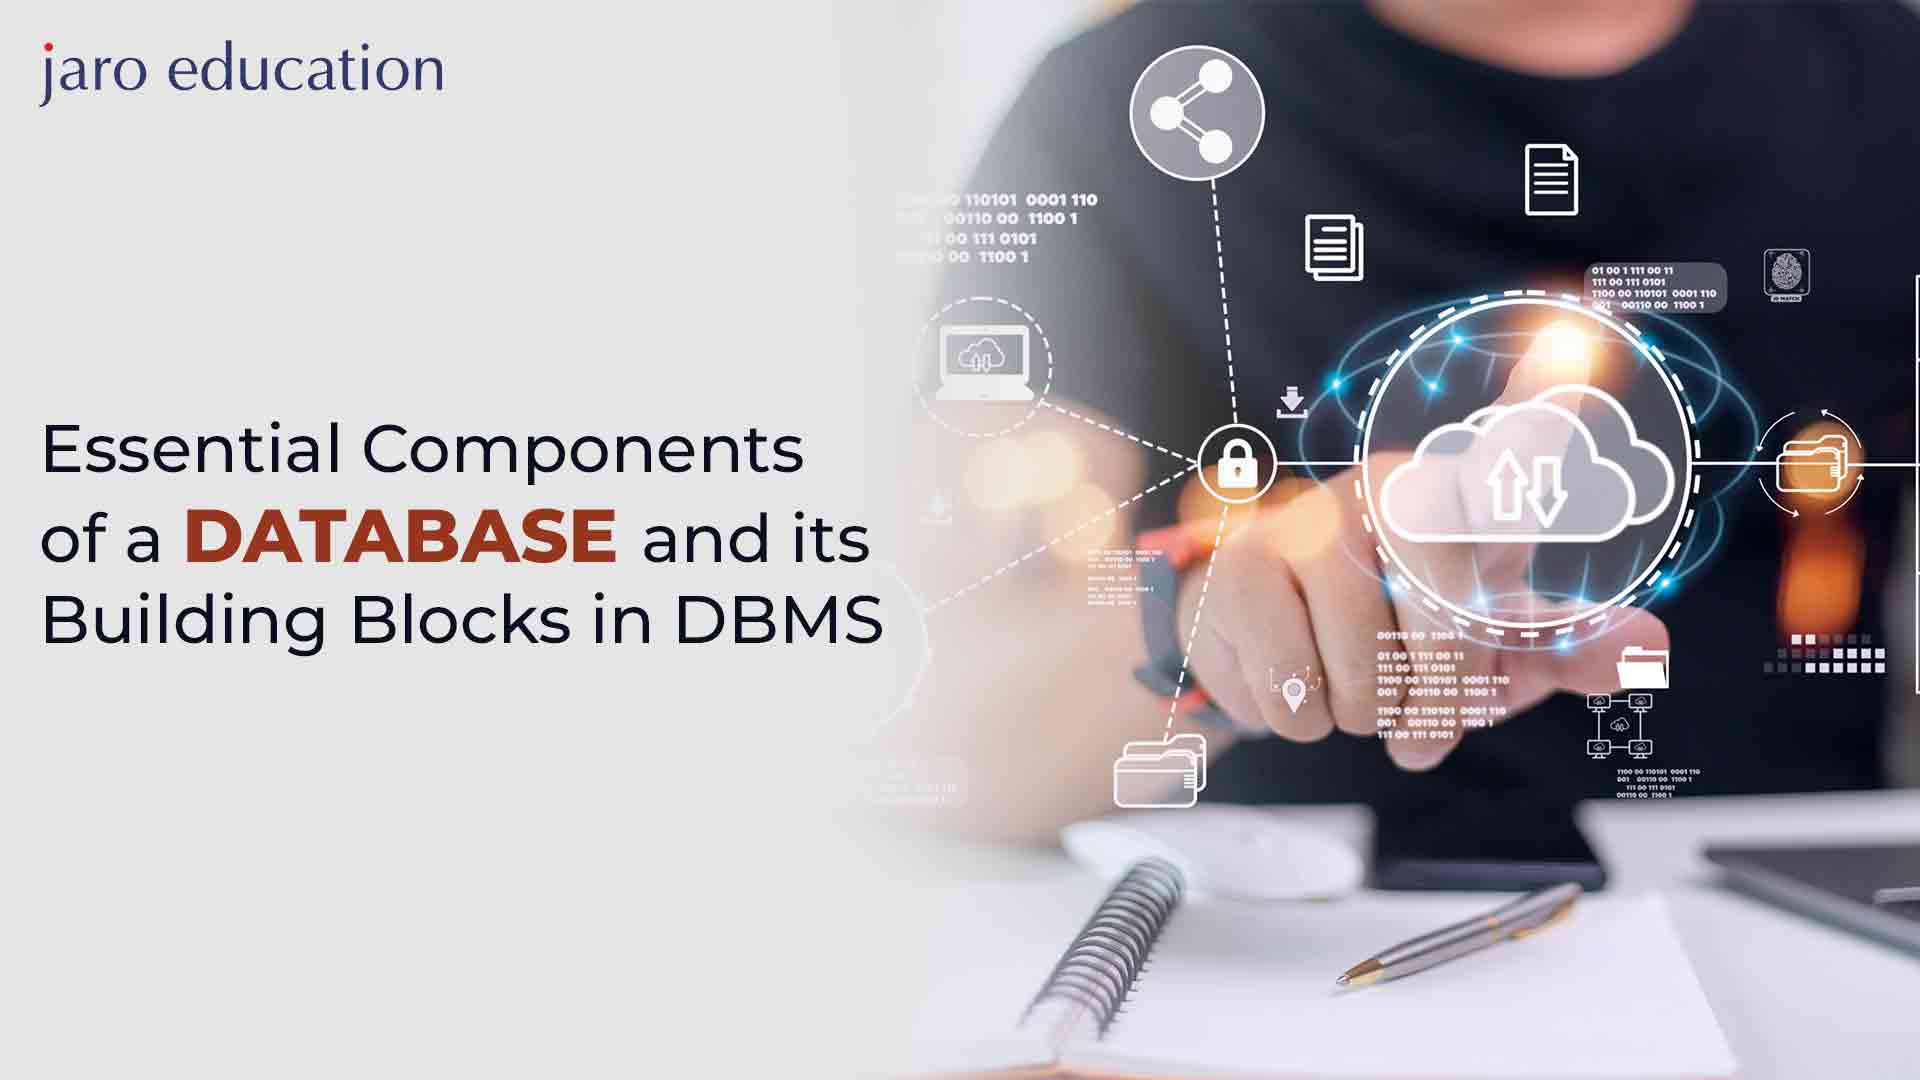 Essential Components of a Database and its Building Blocks in DBMS